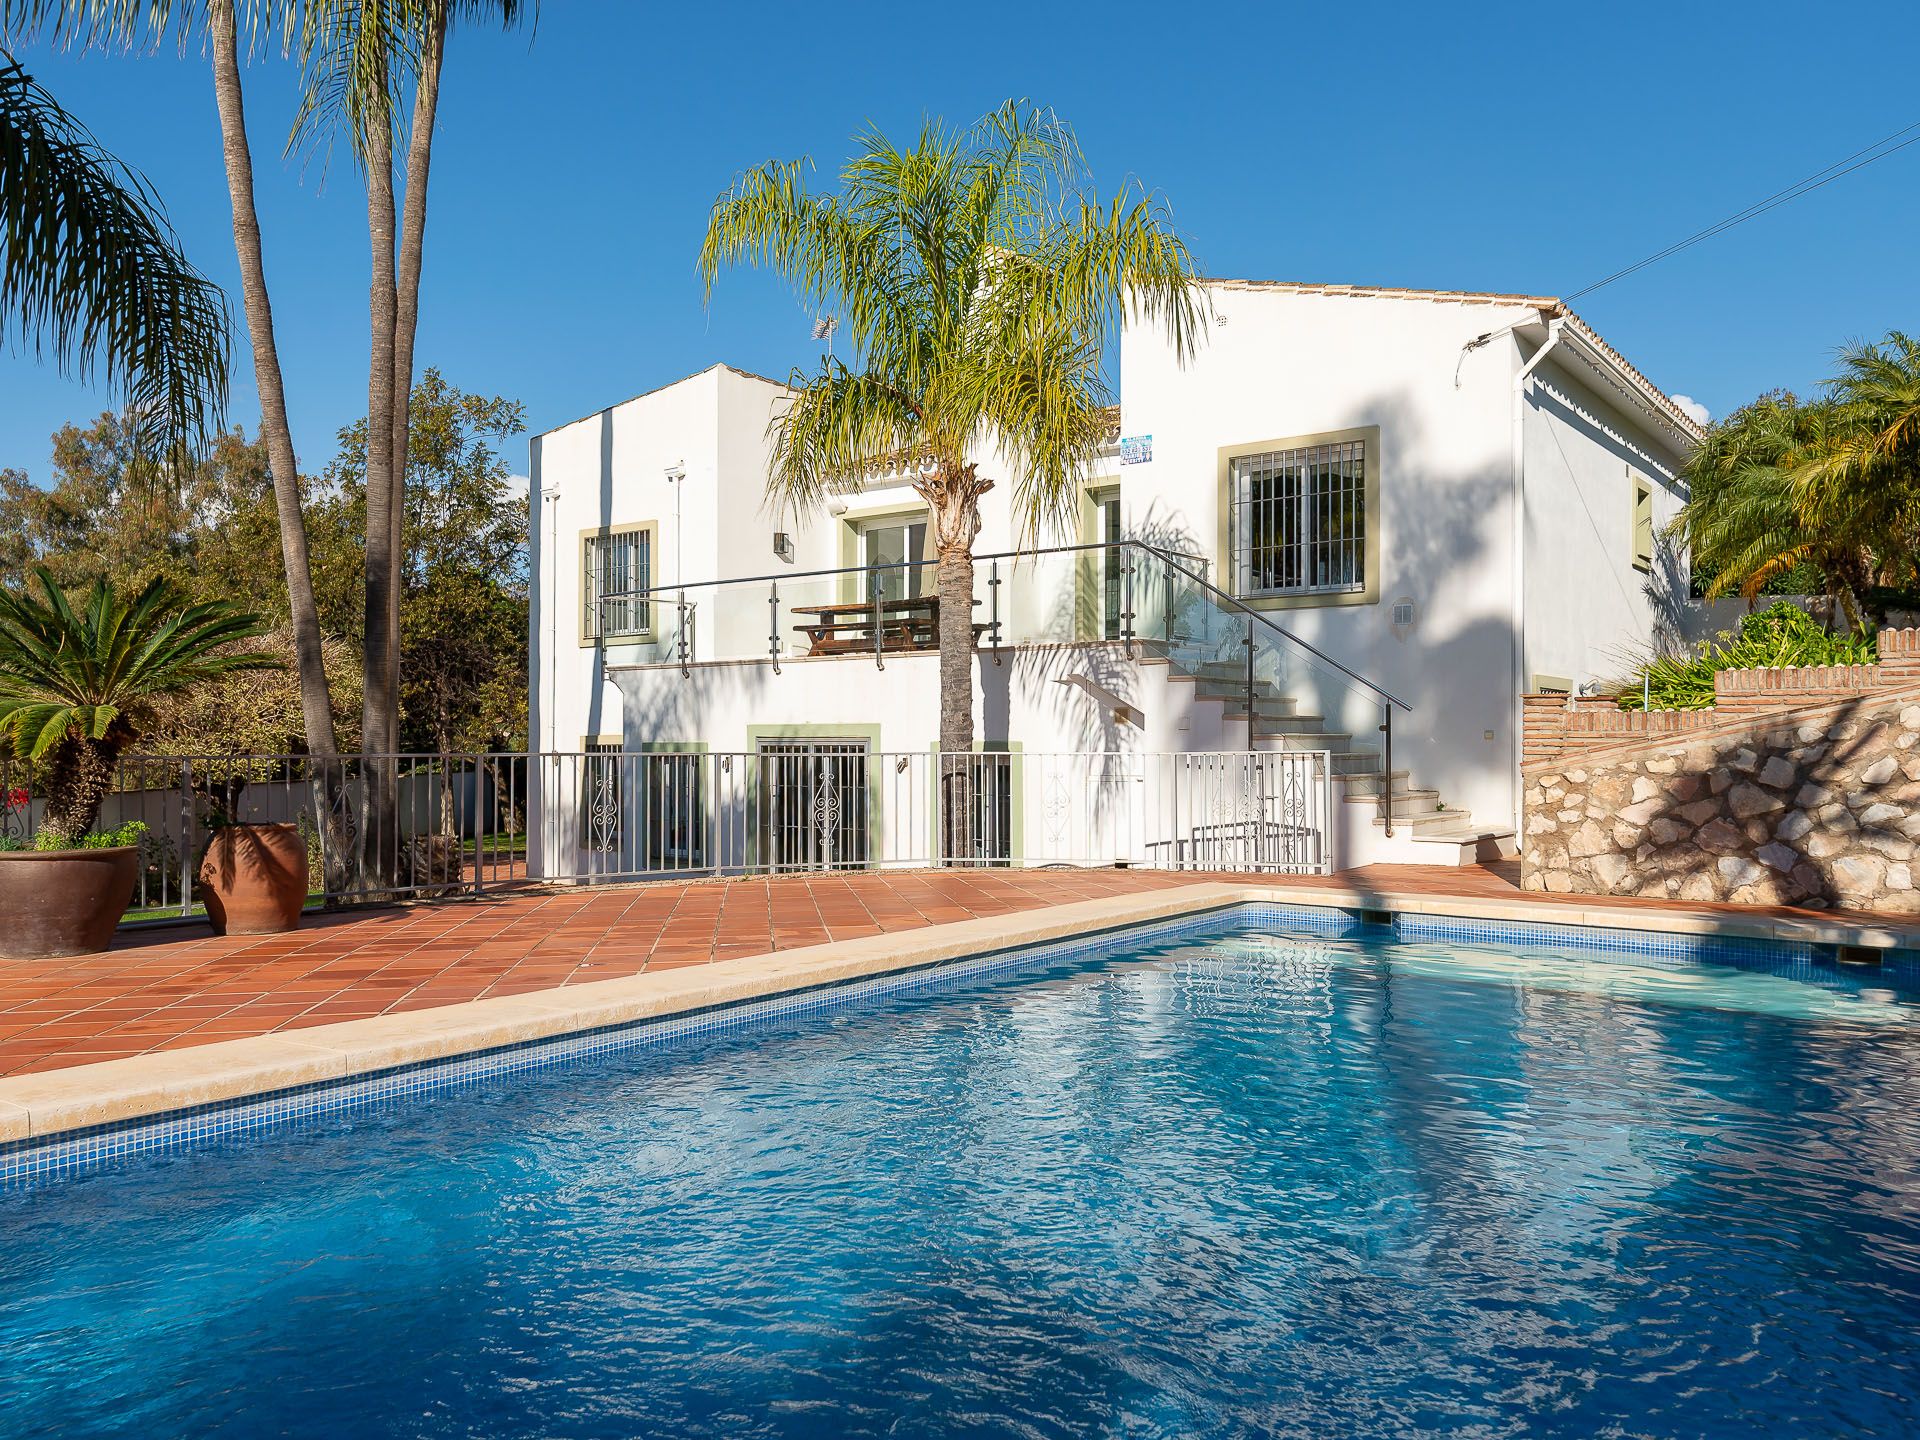 Andalucisan style house with private pool | Engel & Völkers Marbella